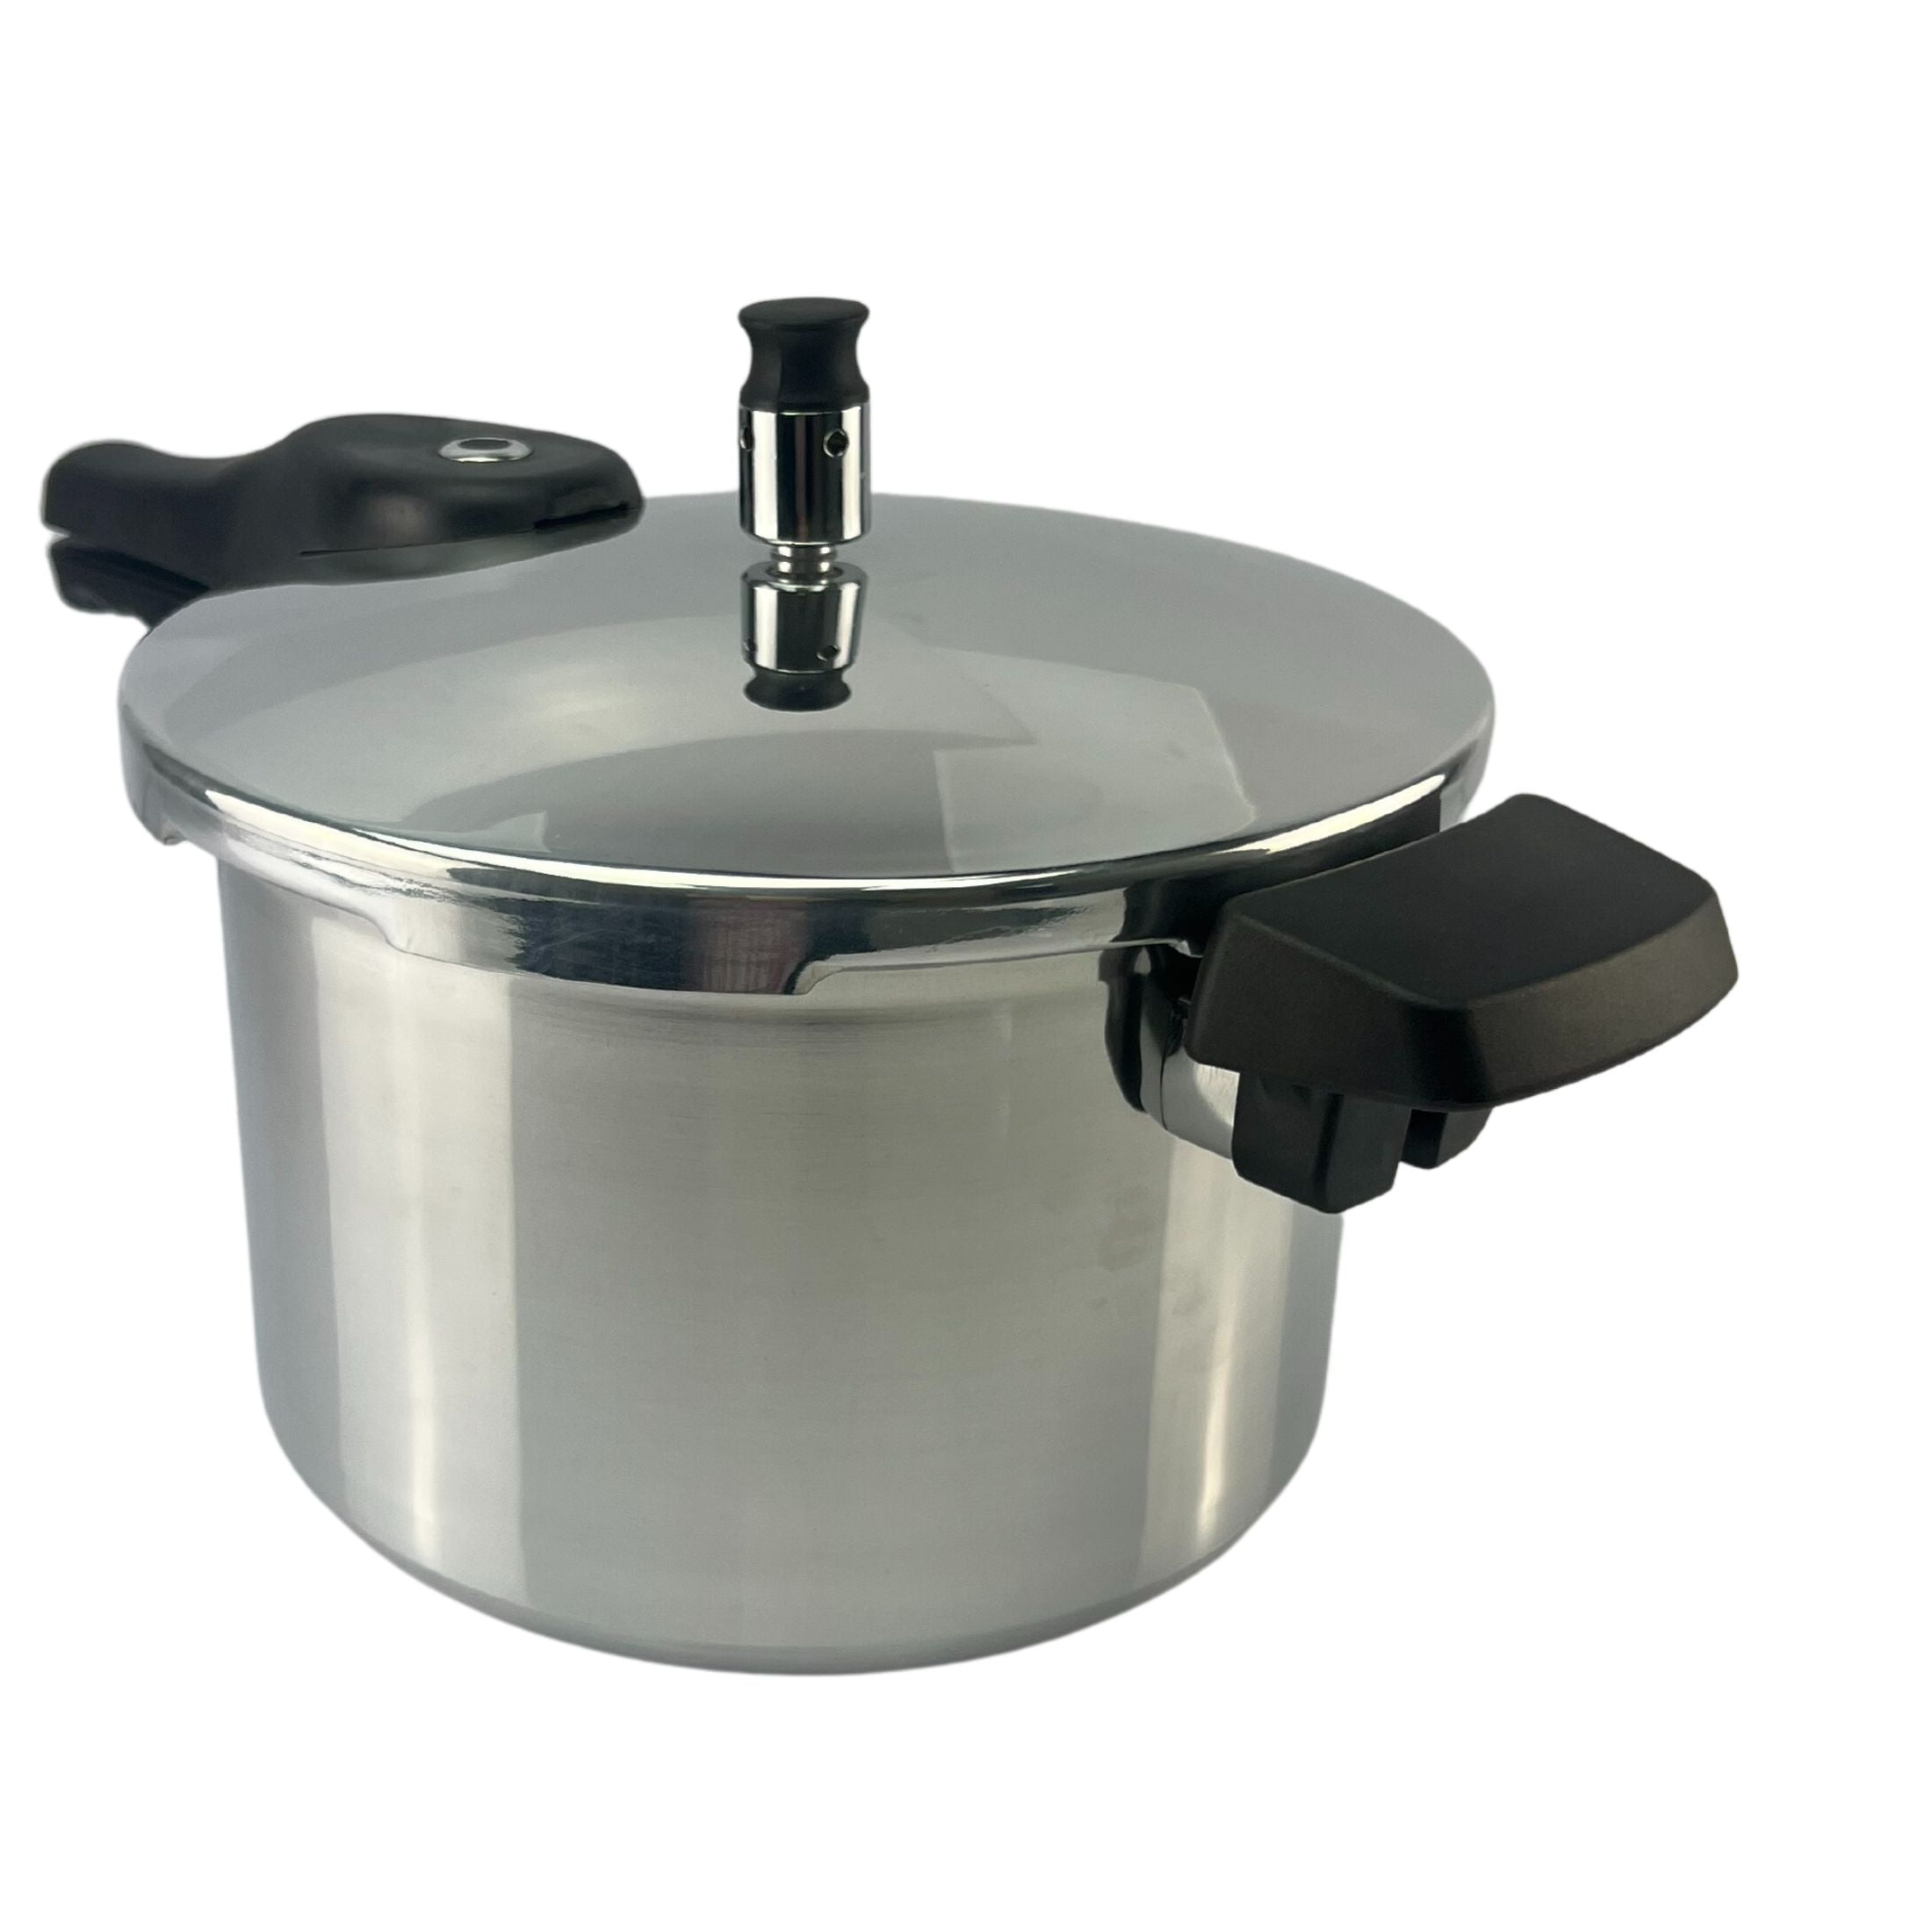 Free shipping 6-quart Stainless Steel Pressure Cooker Ollas arroceras  eléctricas Large burning barrel hollow paper Rice cooker - AliExpress